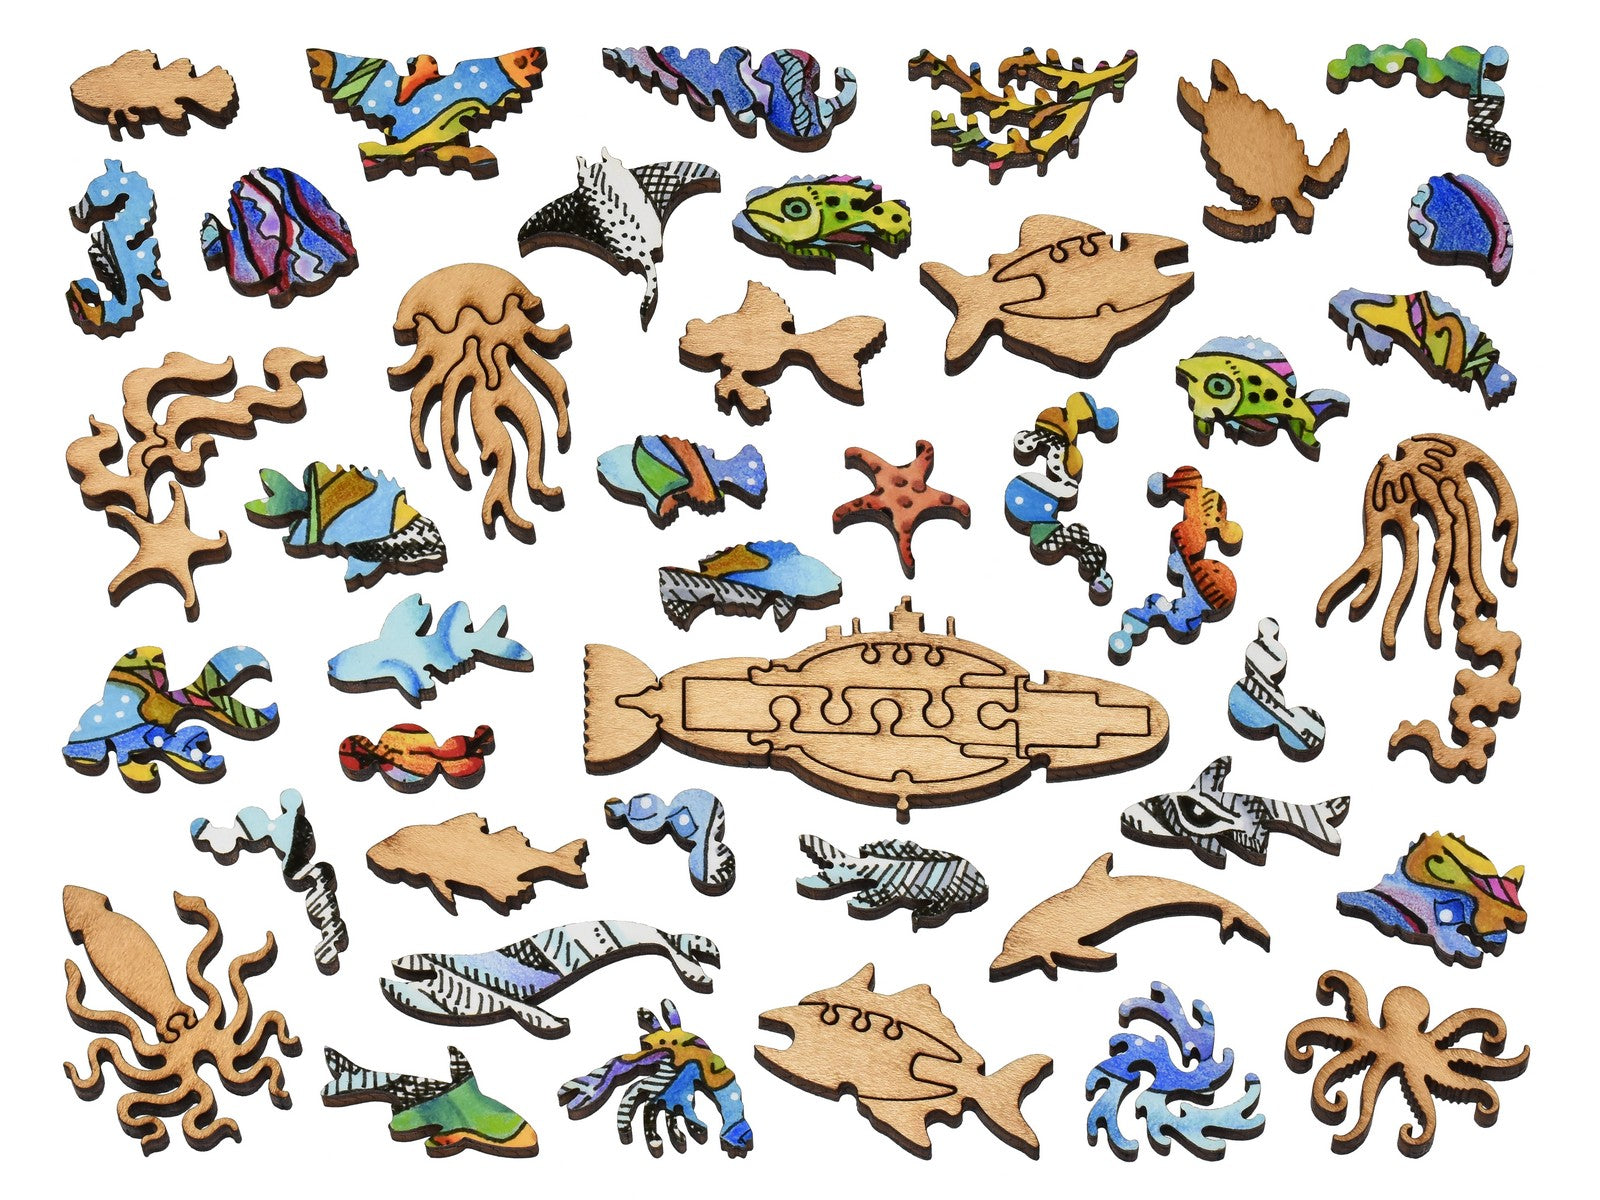 The whimsies that can be found in the puzzle, Under the Sea.